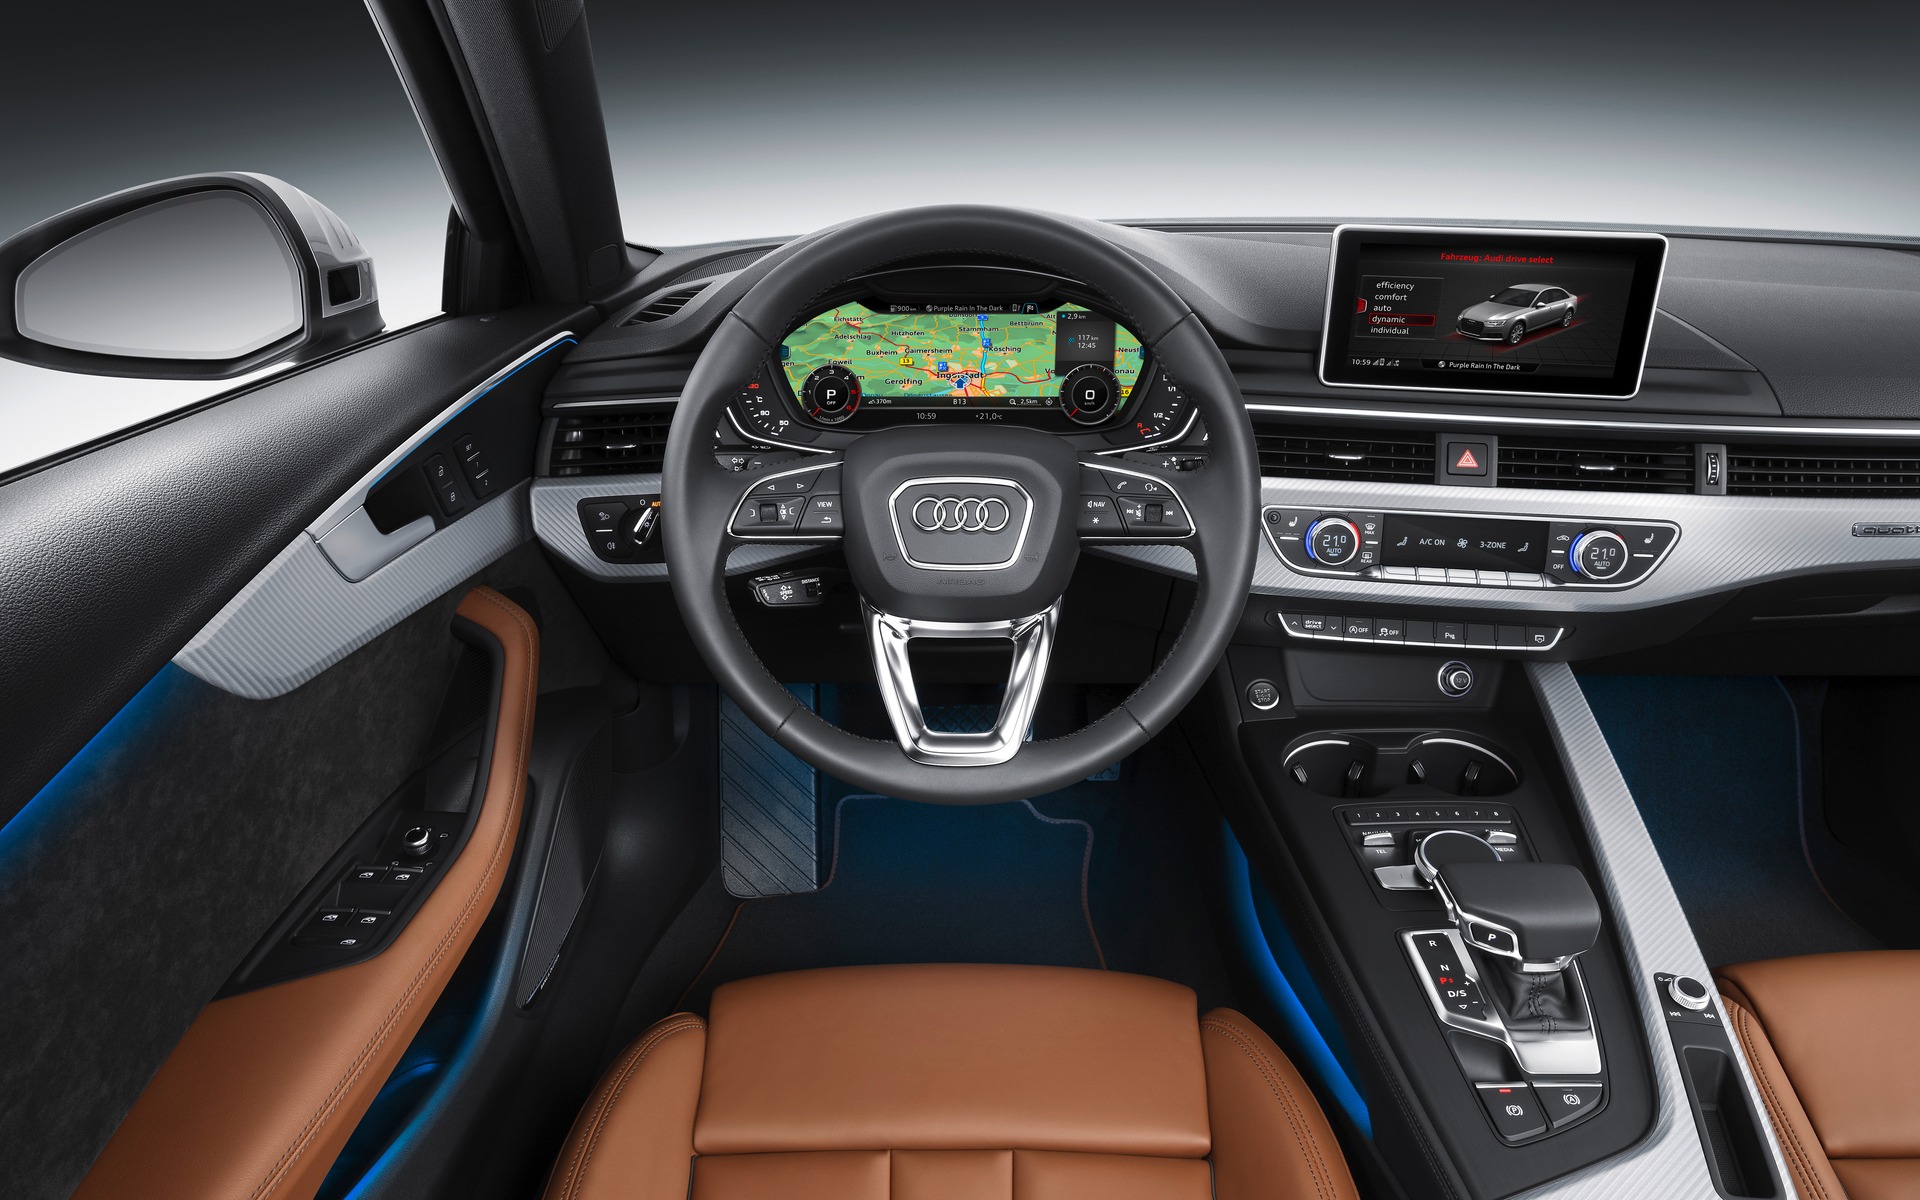 Audi virtual cockpit replaces a traditional instrument panel The 